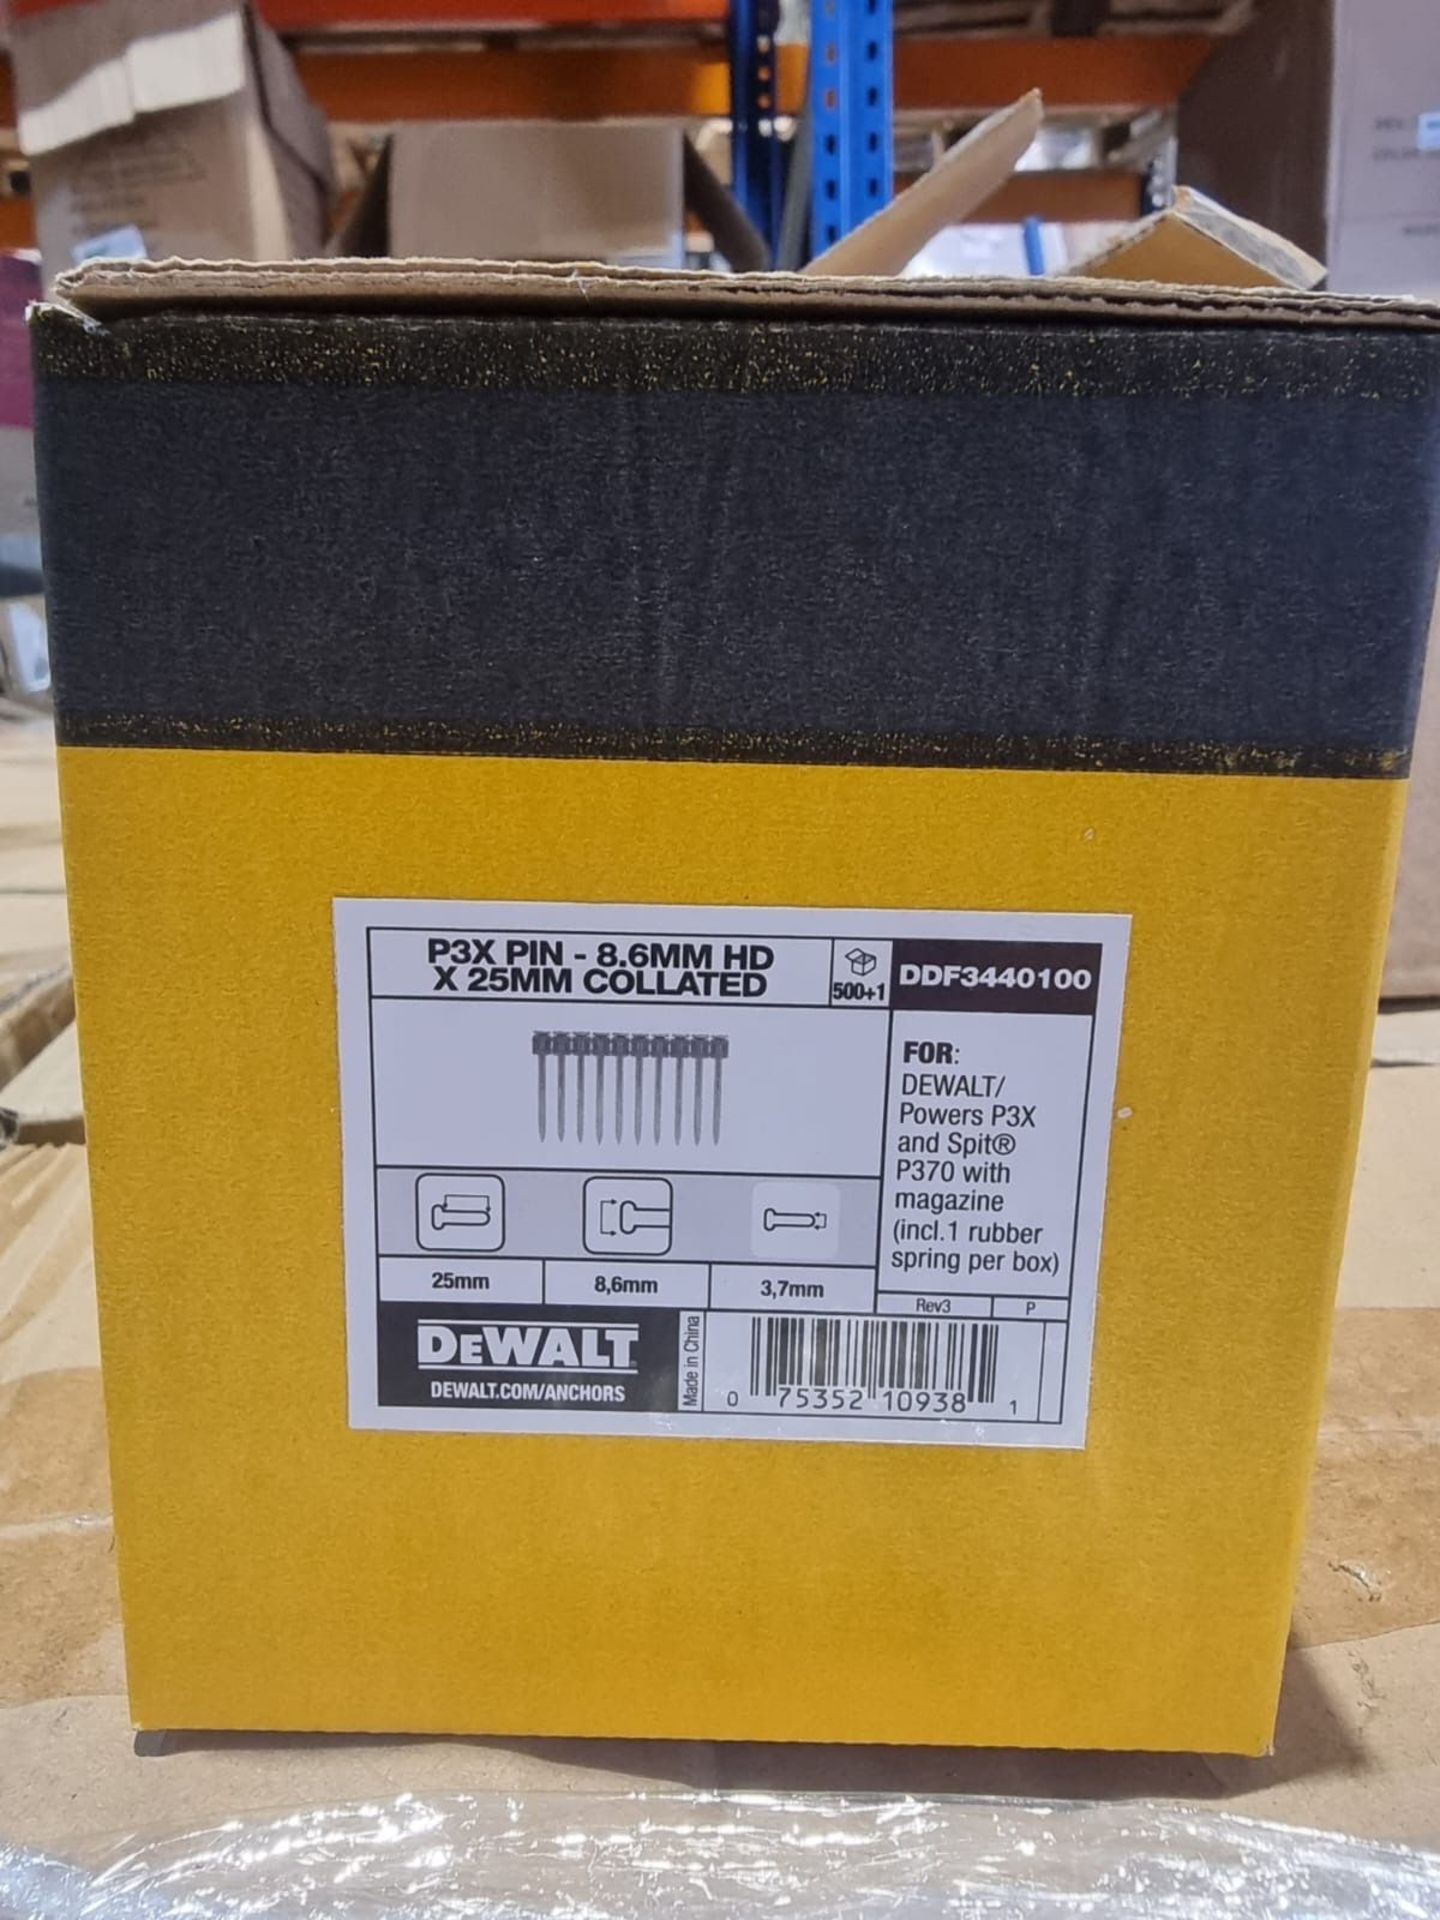 Trade Lot 100 x New Boxes of 500 Dewalt 3.7mm x 25mm HD P3X Pins Collated - DDF3440100. RRP £44.50 - Image 2 of 3